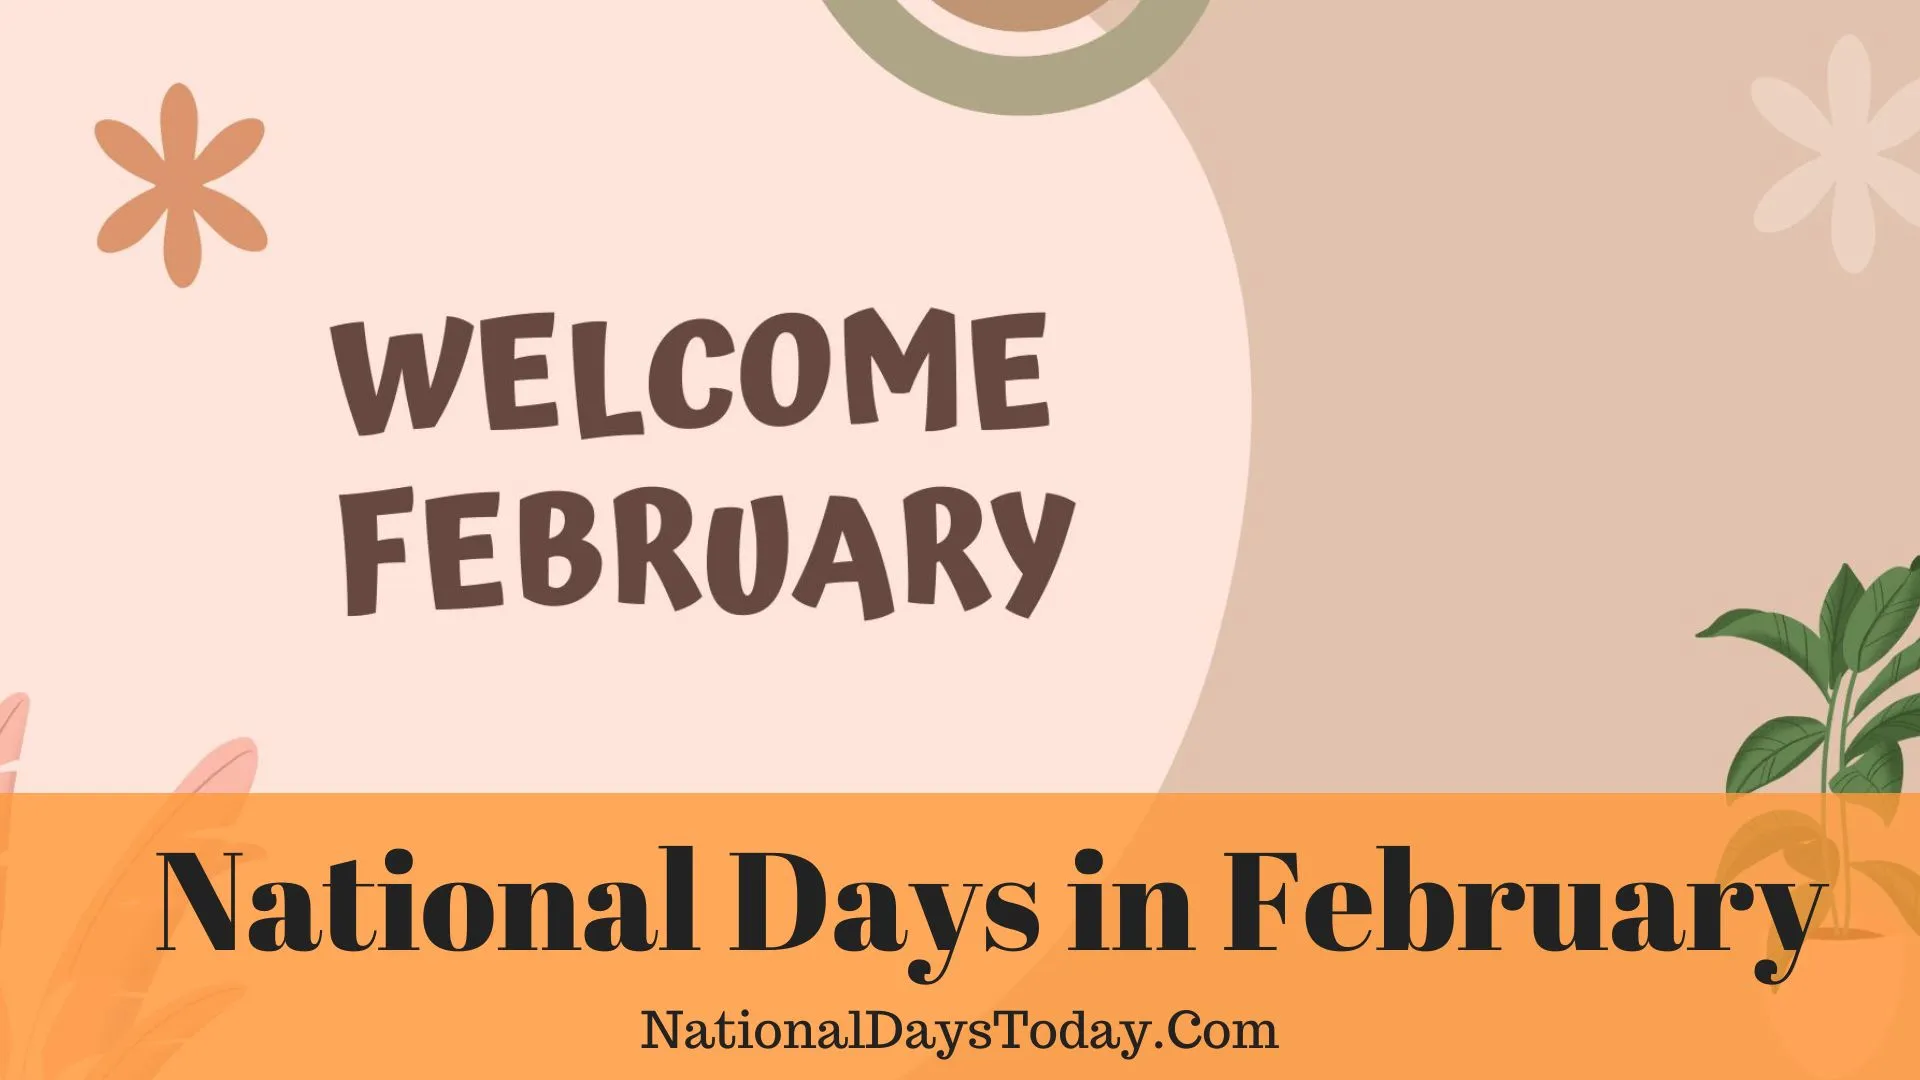 National Days in February